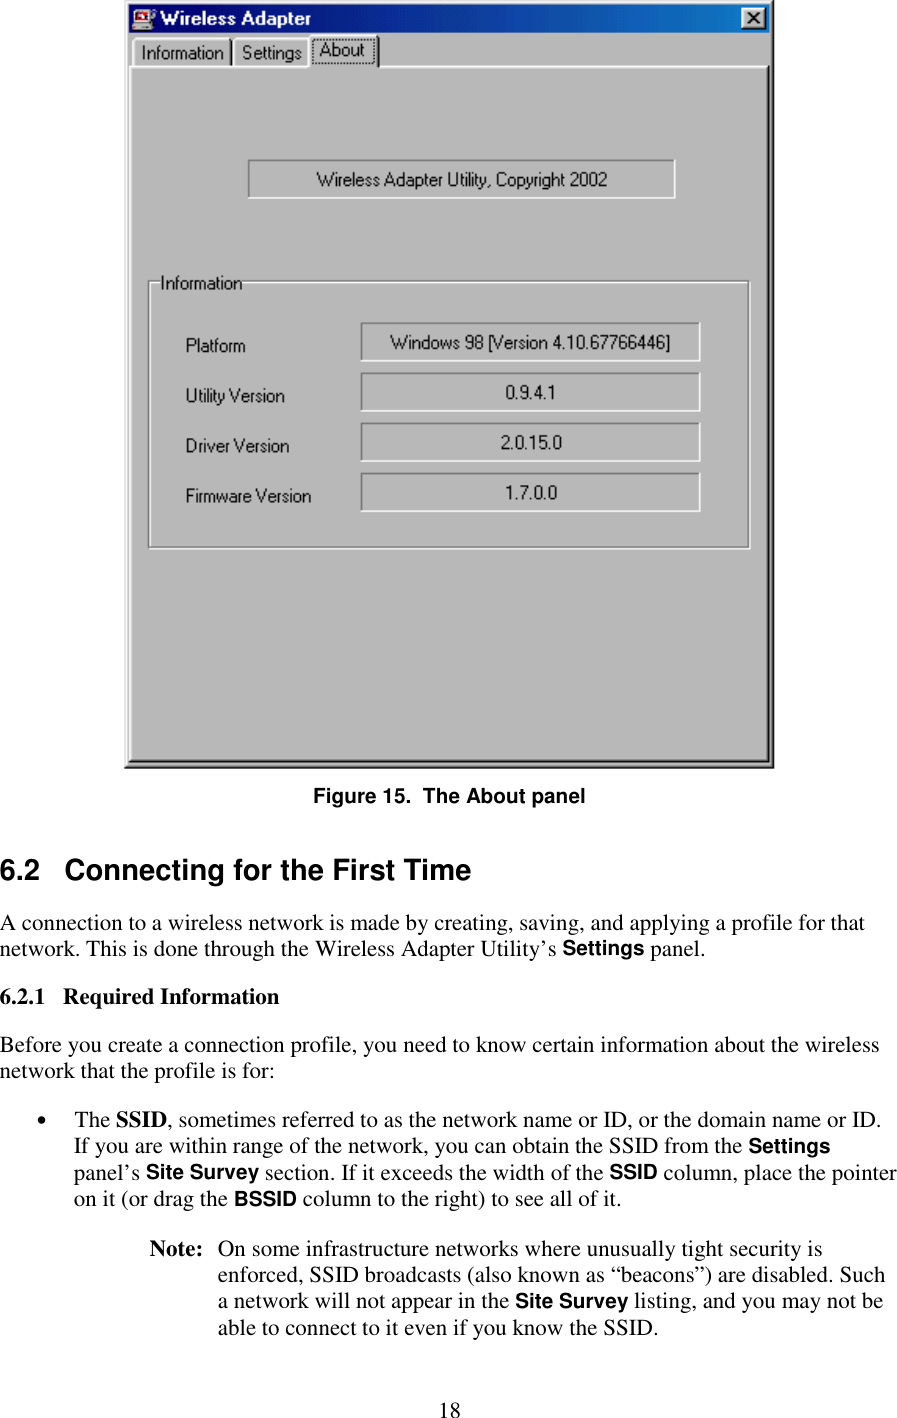   18  Figure 15.  The About panel 6.2   Connecting for the First Time A connection to a wireless network is made by creating, saving, and applying a profile for that network. This is done through the Wireless Adapter Utility’s Settings panel. 6.2.1   Required Information Before you create a connection profile, you need to know certain information about the wireless network that the profile is for: •  The SSID, sometimes referred to as the network name or ID, or the domain name or ID. If you are within range of the network, you can obtain the SSID from the Settings panel’s Site Survey section. If it exceeds the width of the SSID column, place the pointer on it (or drag the BSSID column to the right) to see all of it. Note:   On some infrastructure networks where unusually tight security is enforced, SSID broadcasts (also known as “beacons”) are disabled. Such a network will not appear in the Site Survey listing, and you may not be able to connect to it even if you know the SSID.  